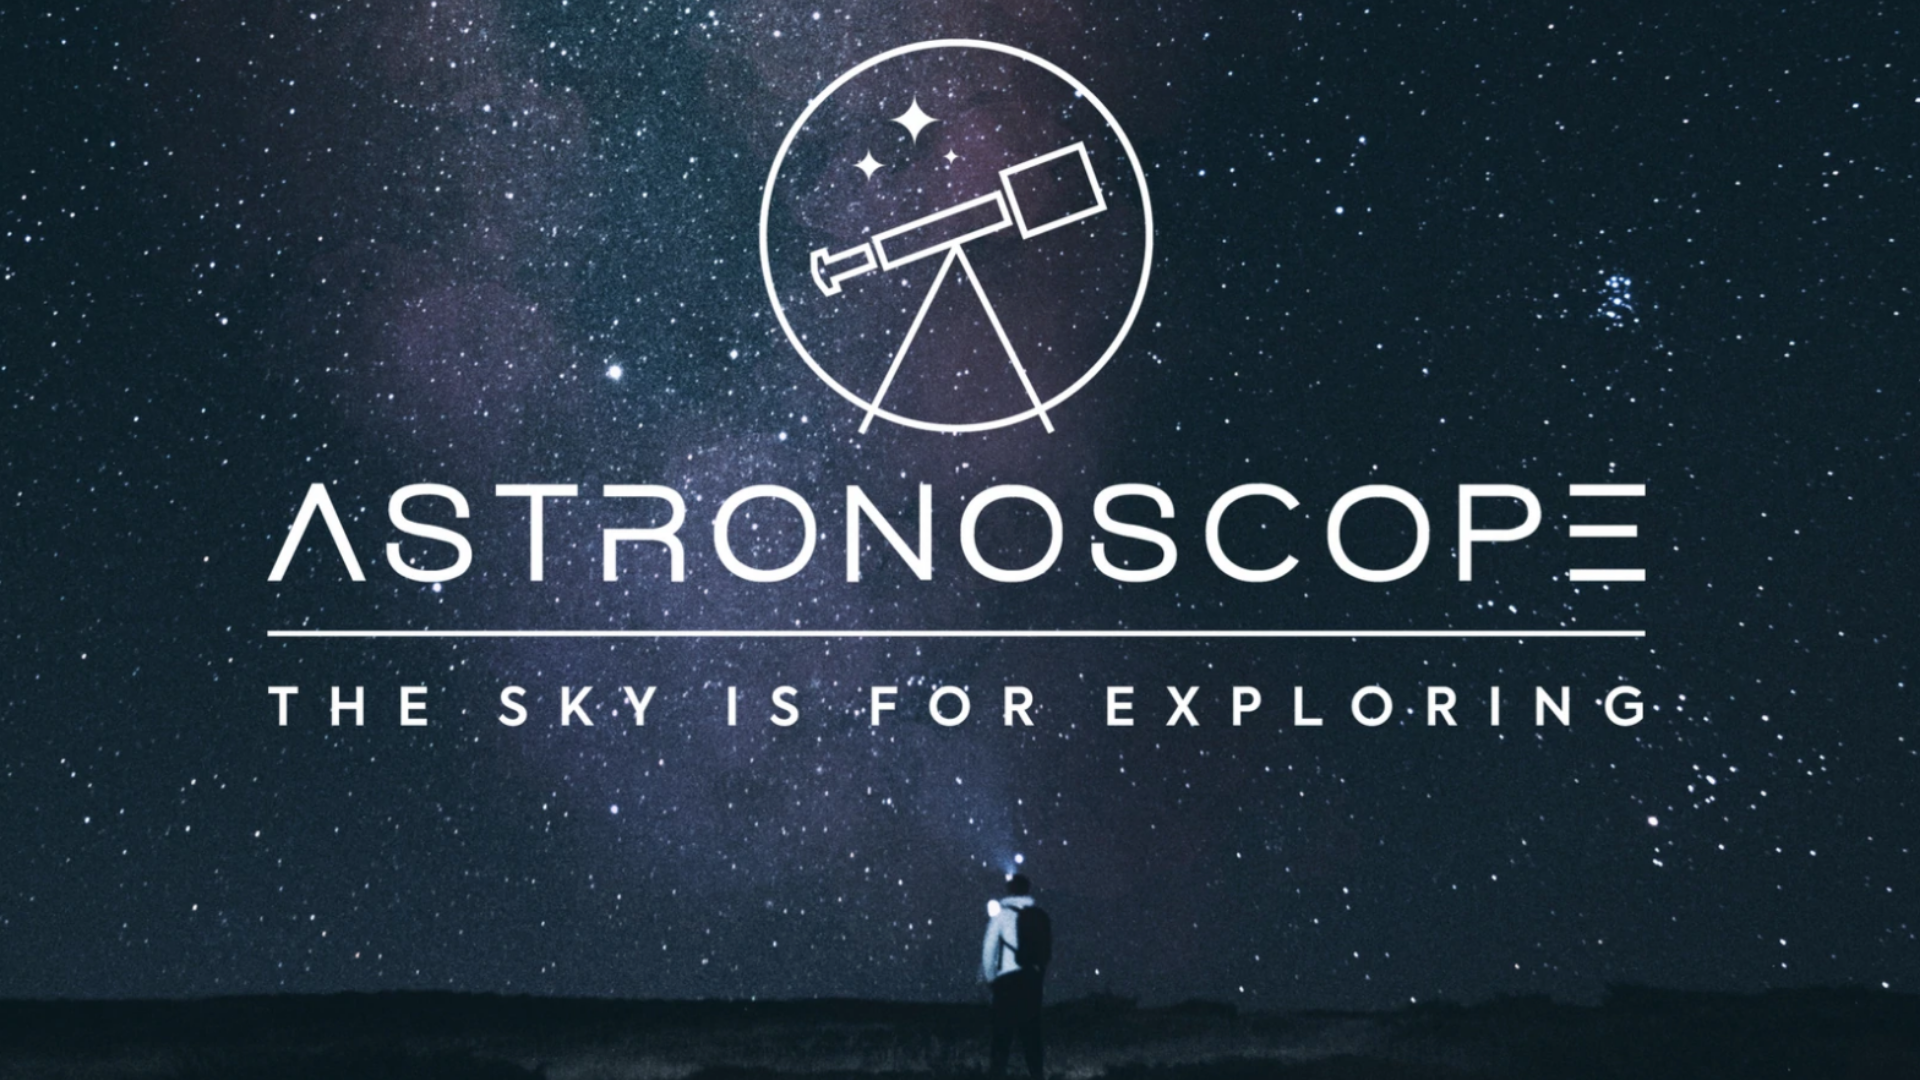 Welcome to Astronoscope - A place for astronomy enthusiasts to buy high-quality stargazing equipment and indulge their curious minds about the universe